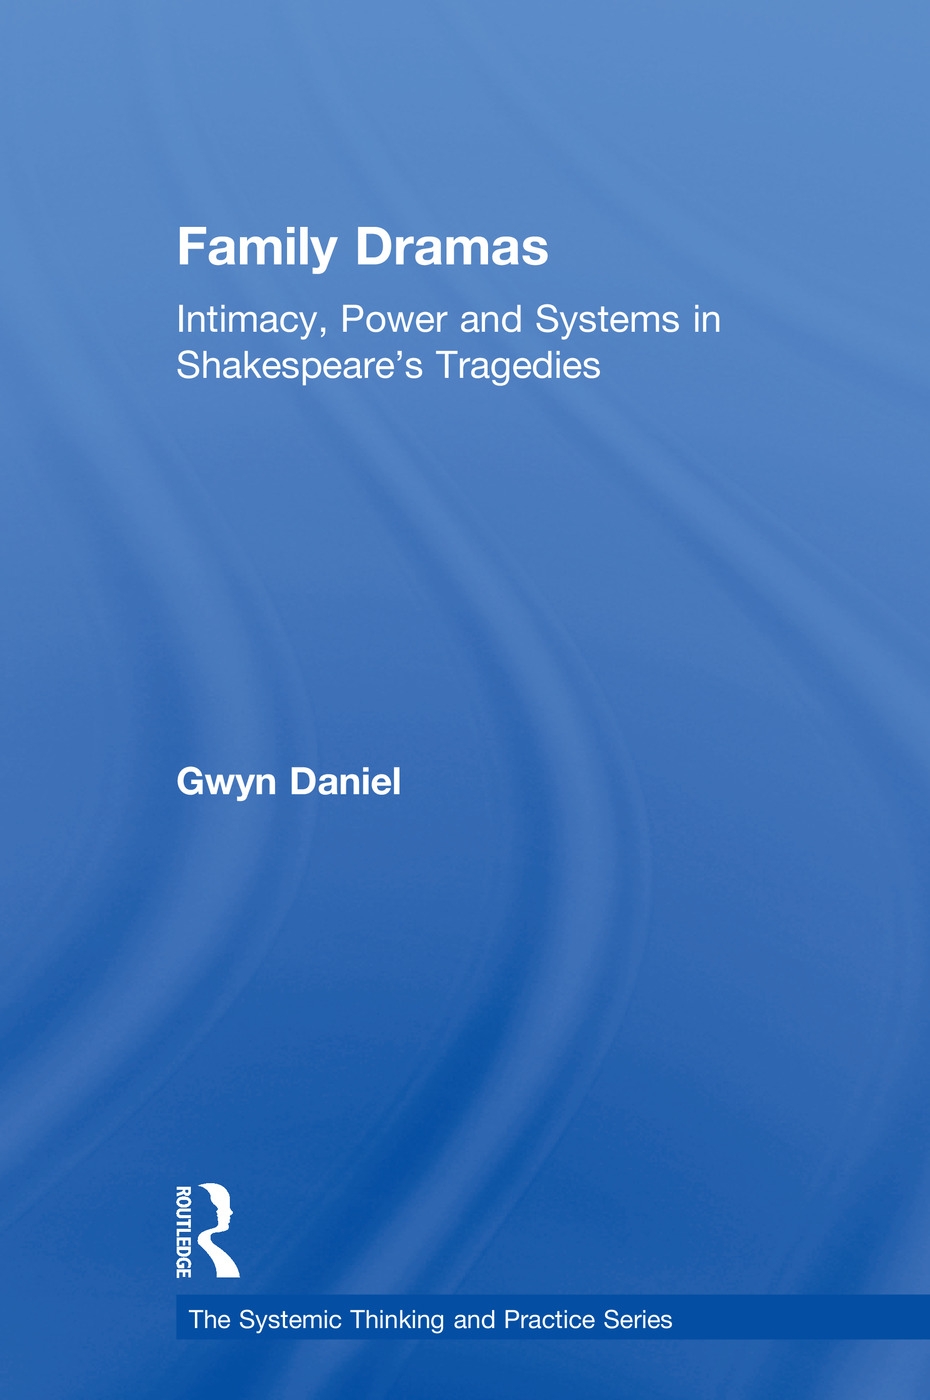 Family Dramas: Intimacy, Power and Systems in Shakespeare’s Tragedies